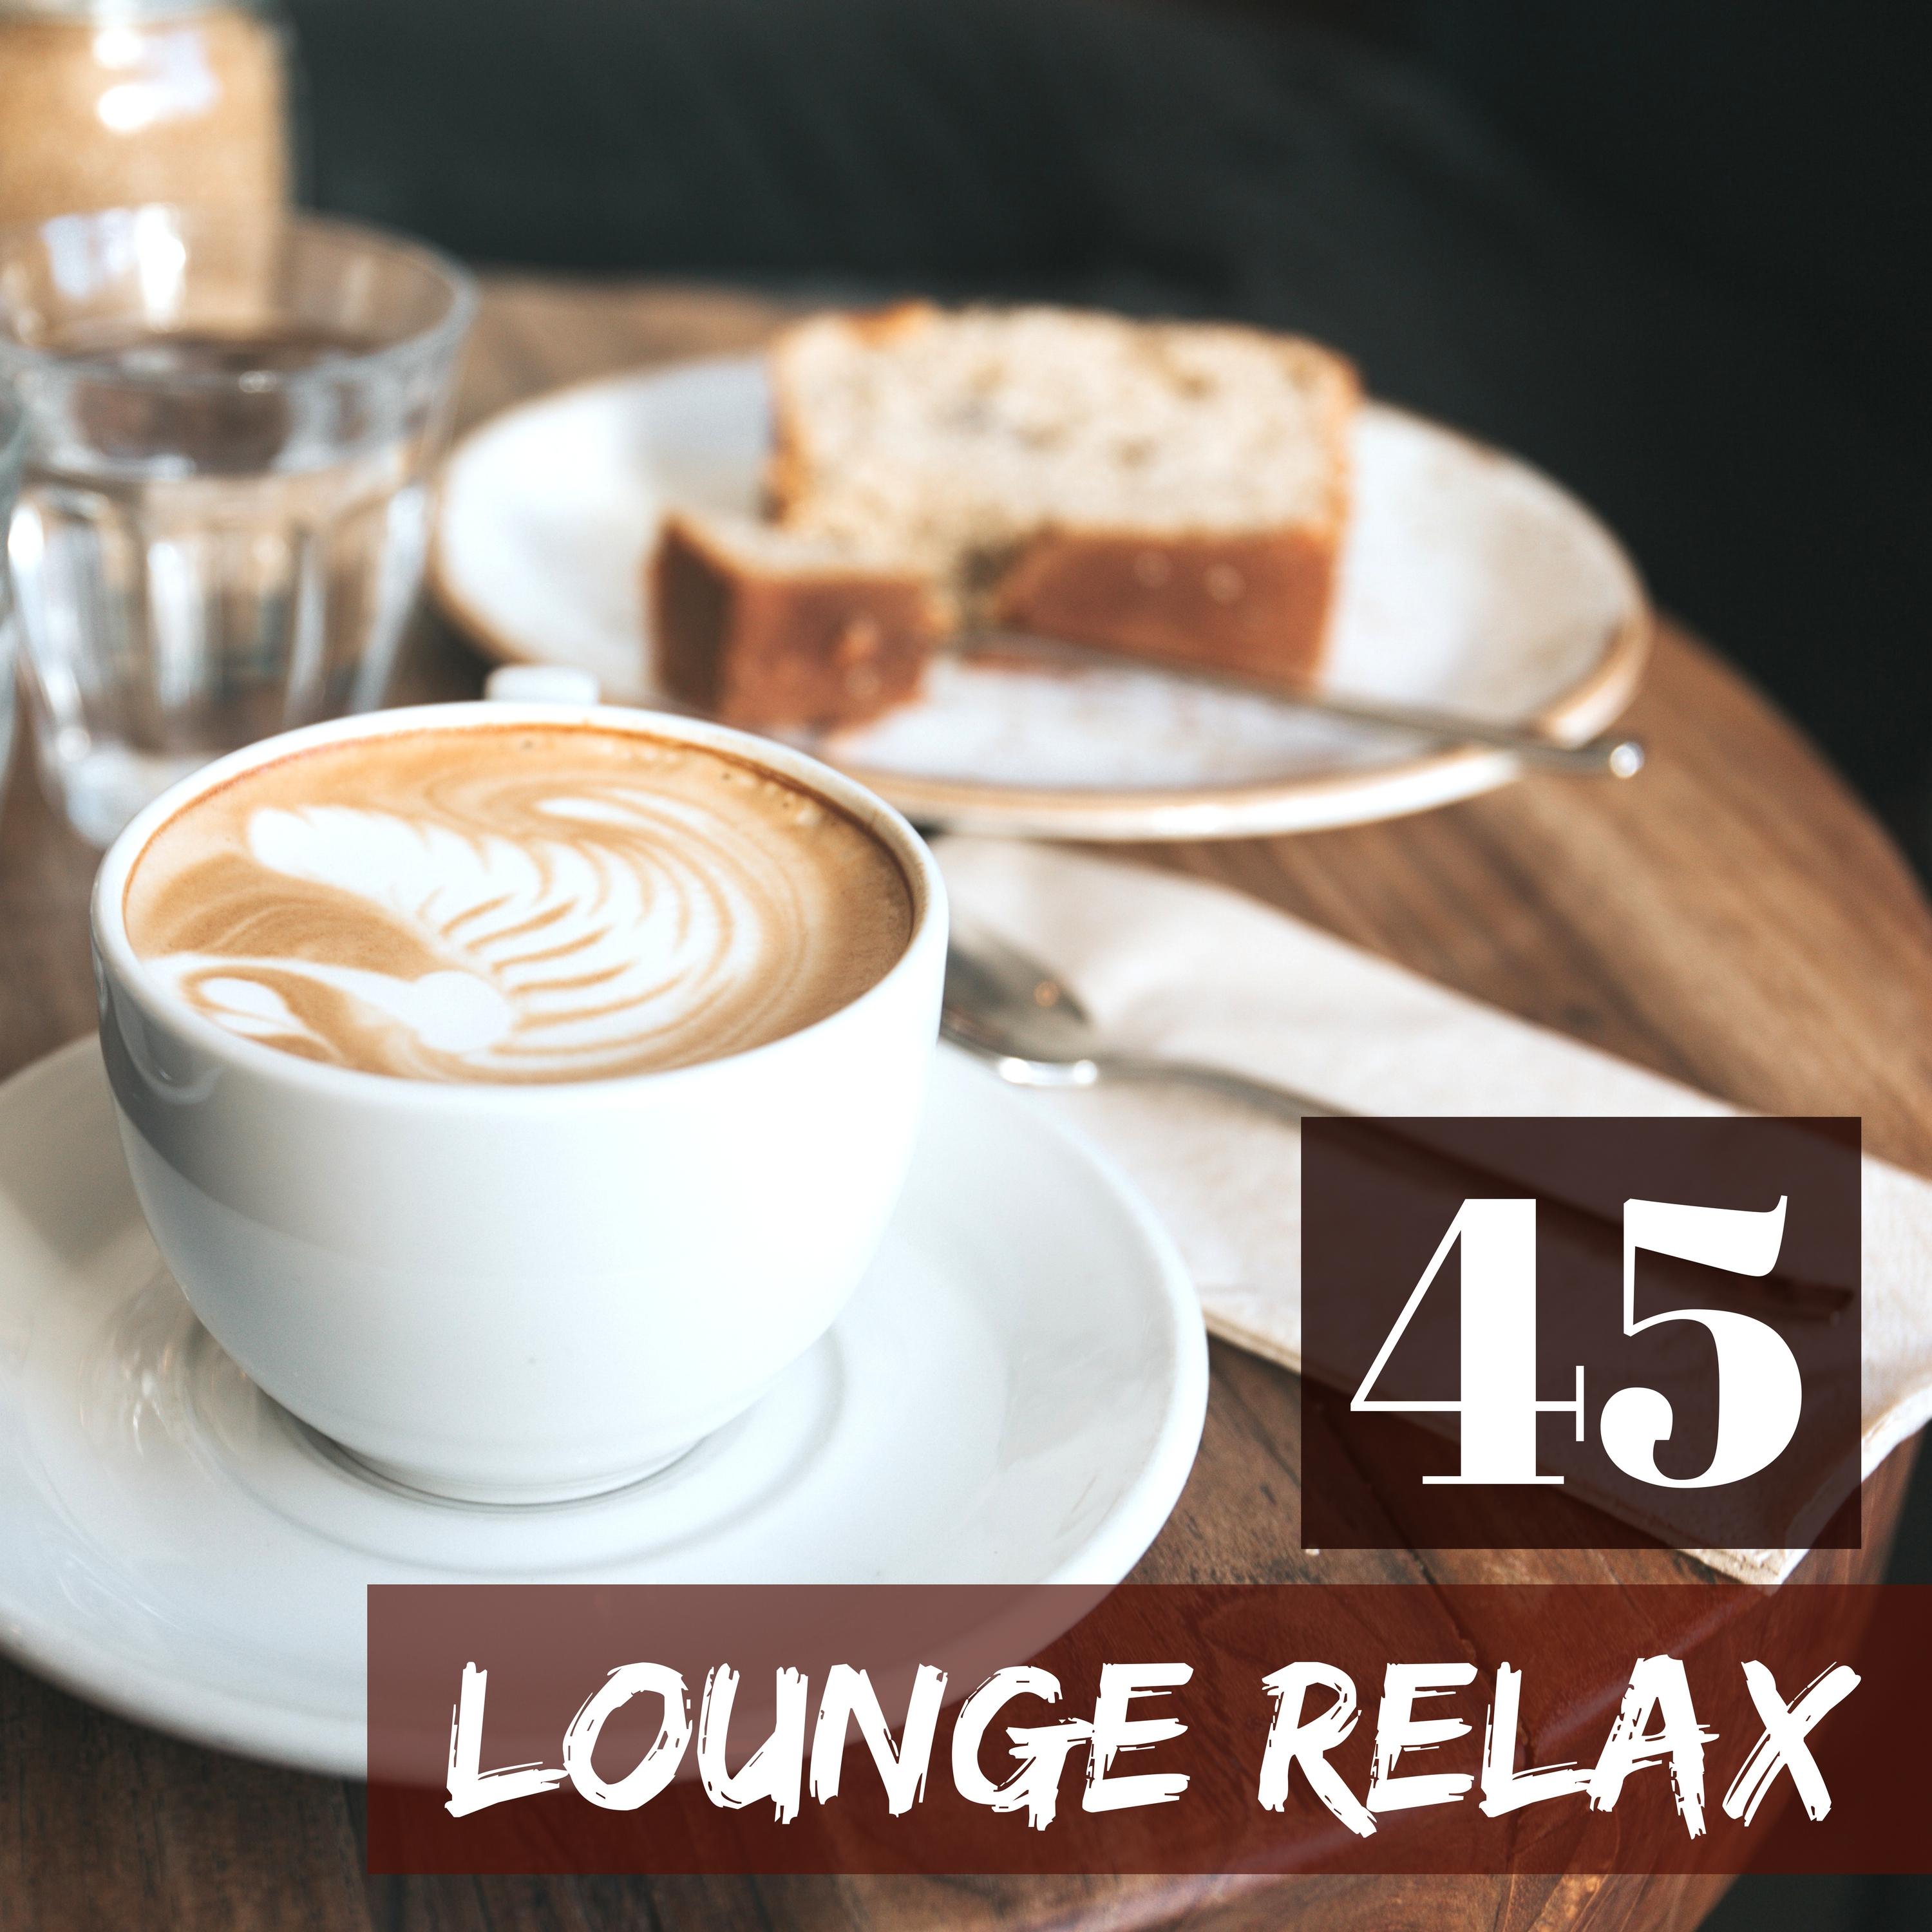 Lounge Relax 45 - Easy Listening Instrumental Chillout 2018 for Lounge Cafe